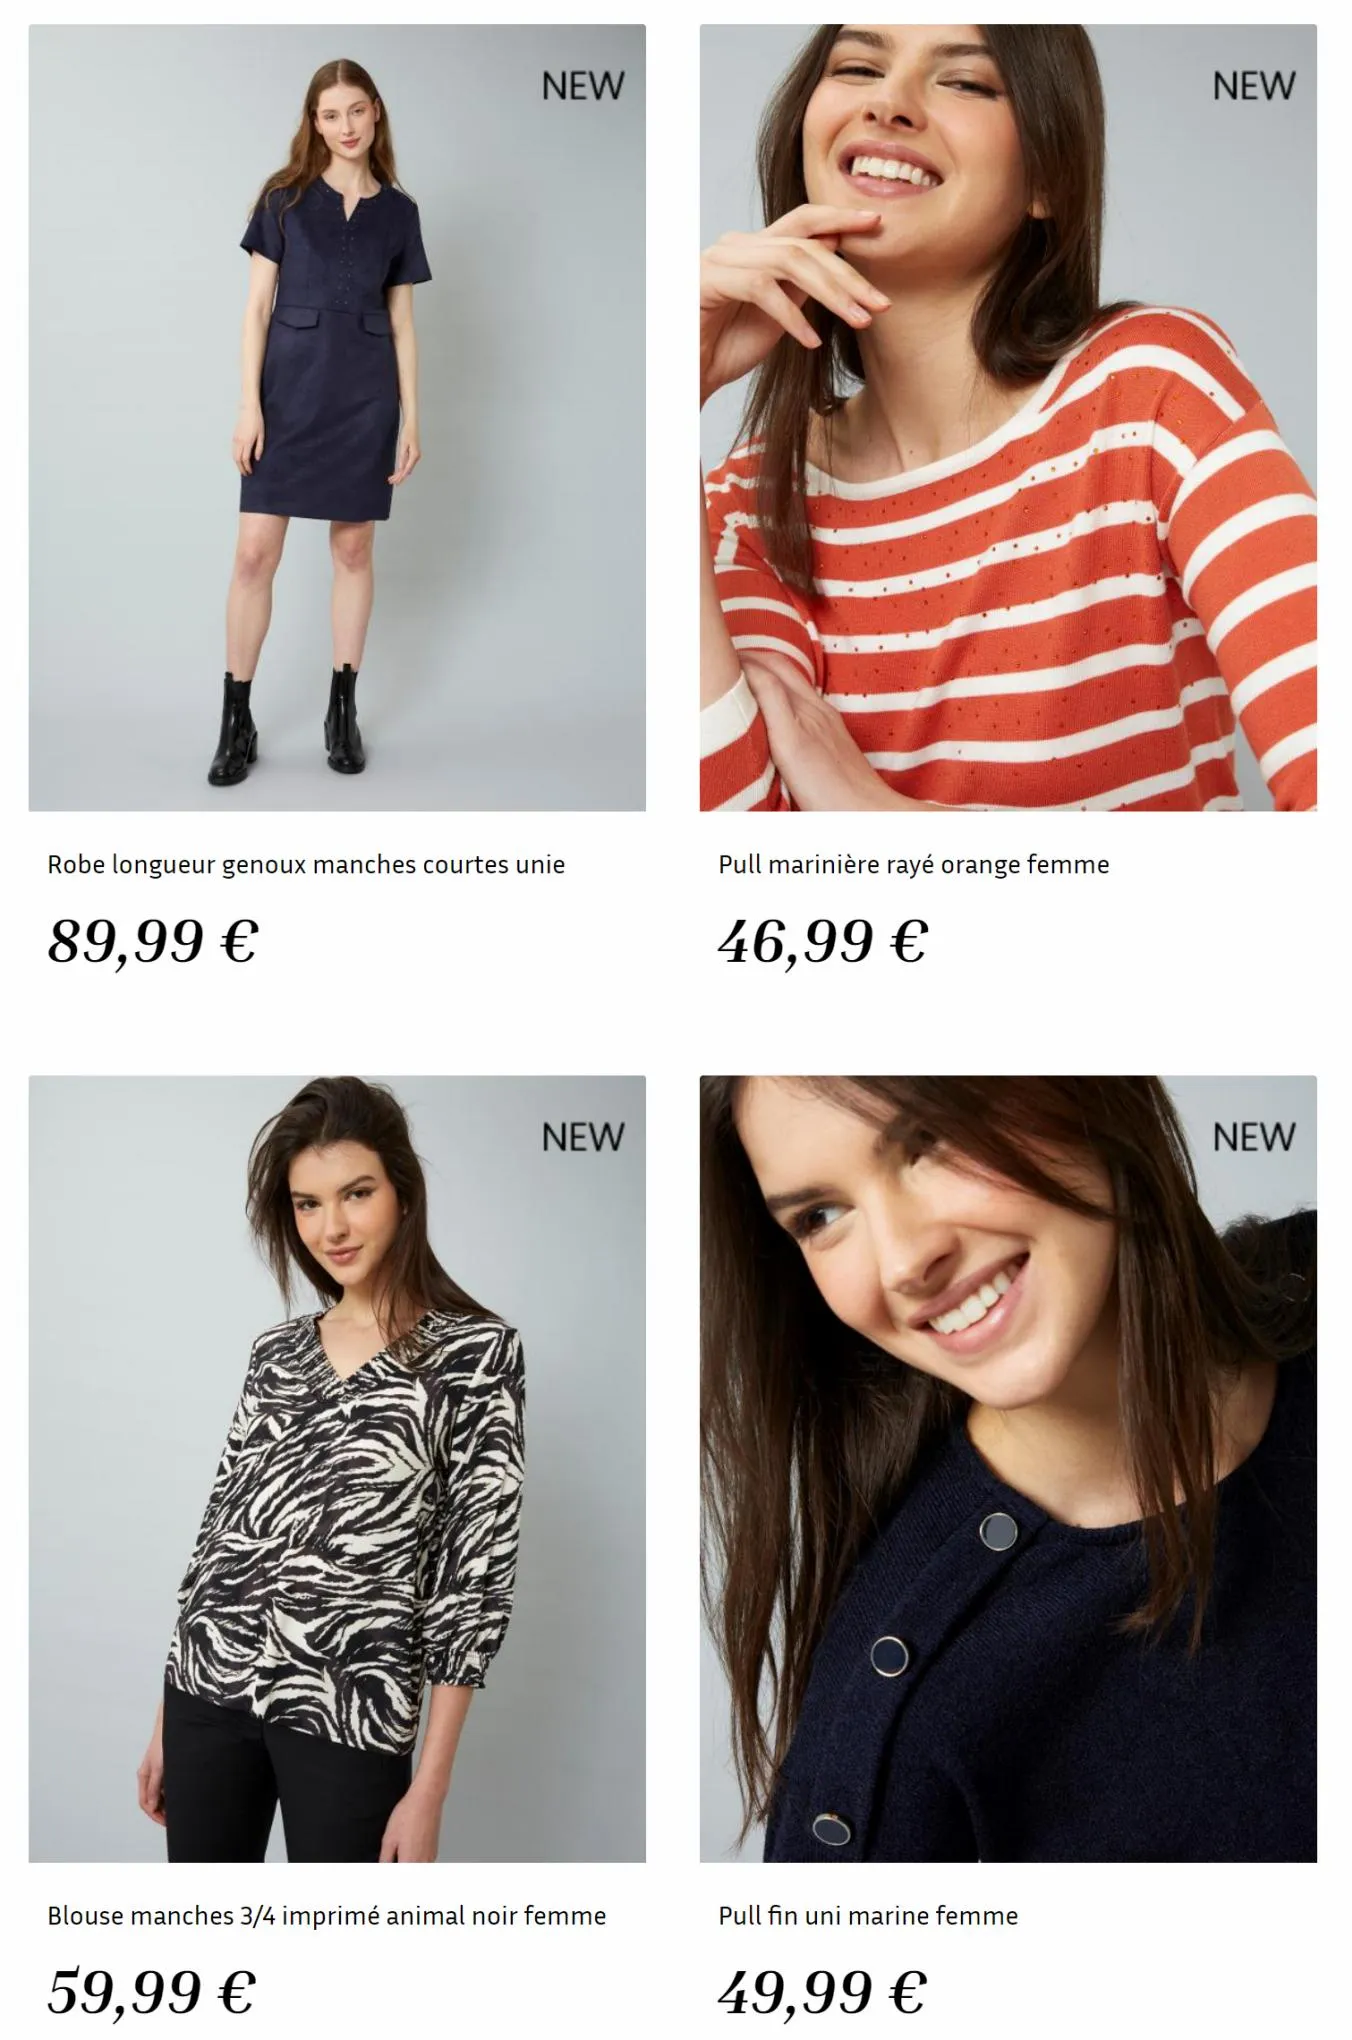 Catalogue SOLDES 60%, page 00004